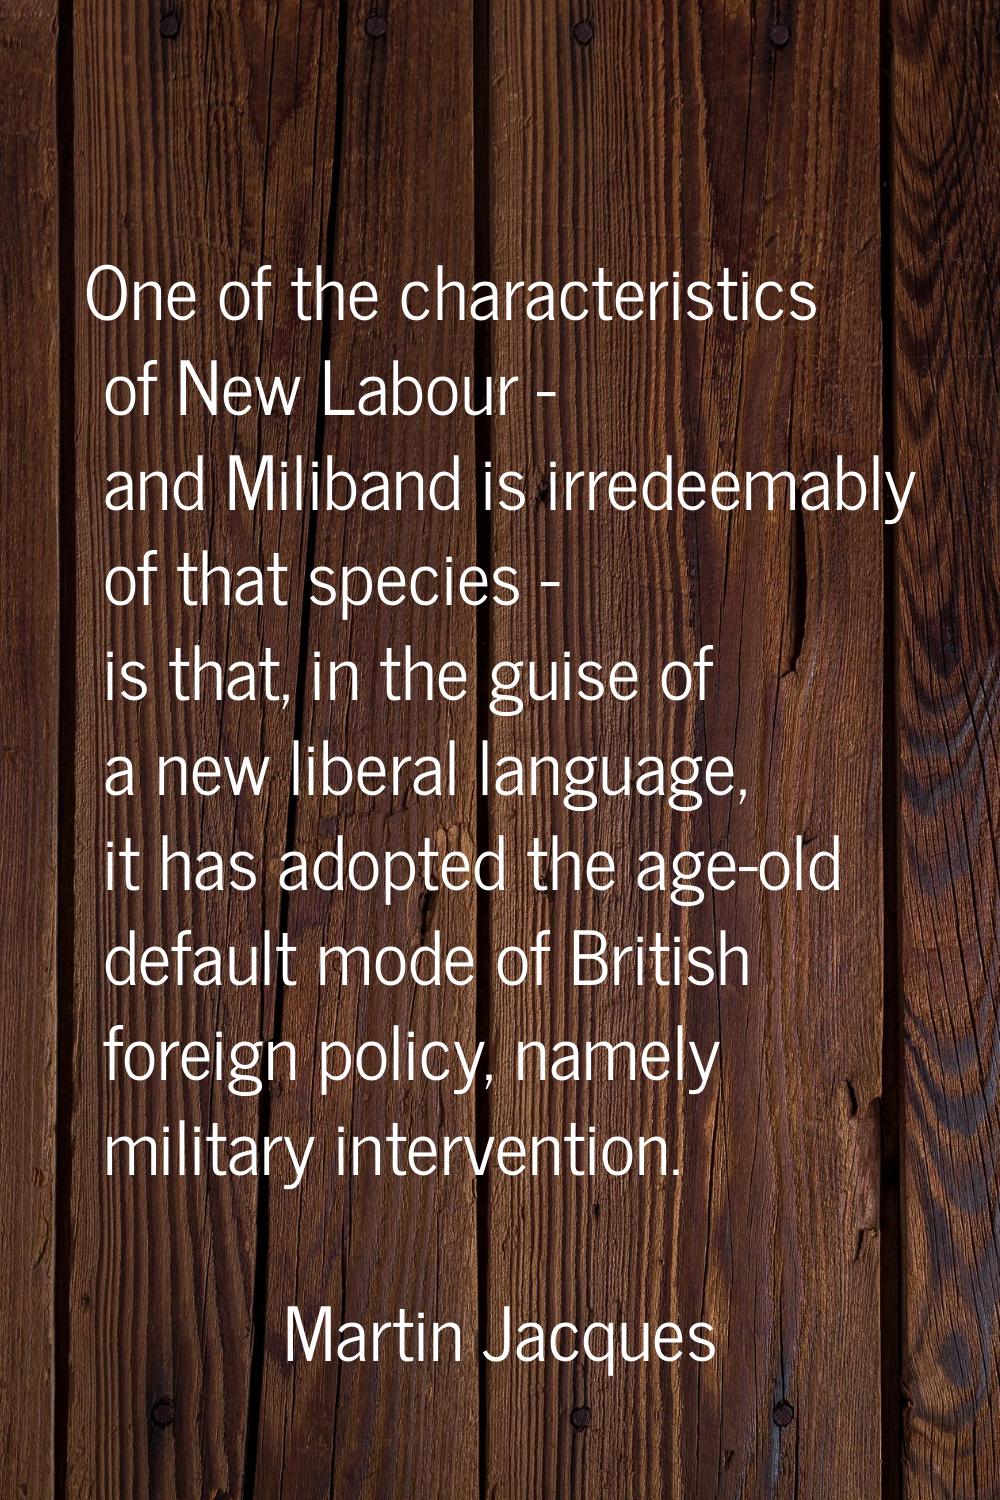 One of the characteristics of New Labour - and Miliband is irredeemably of that species - is that, 